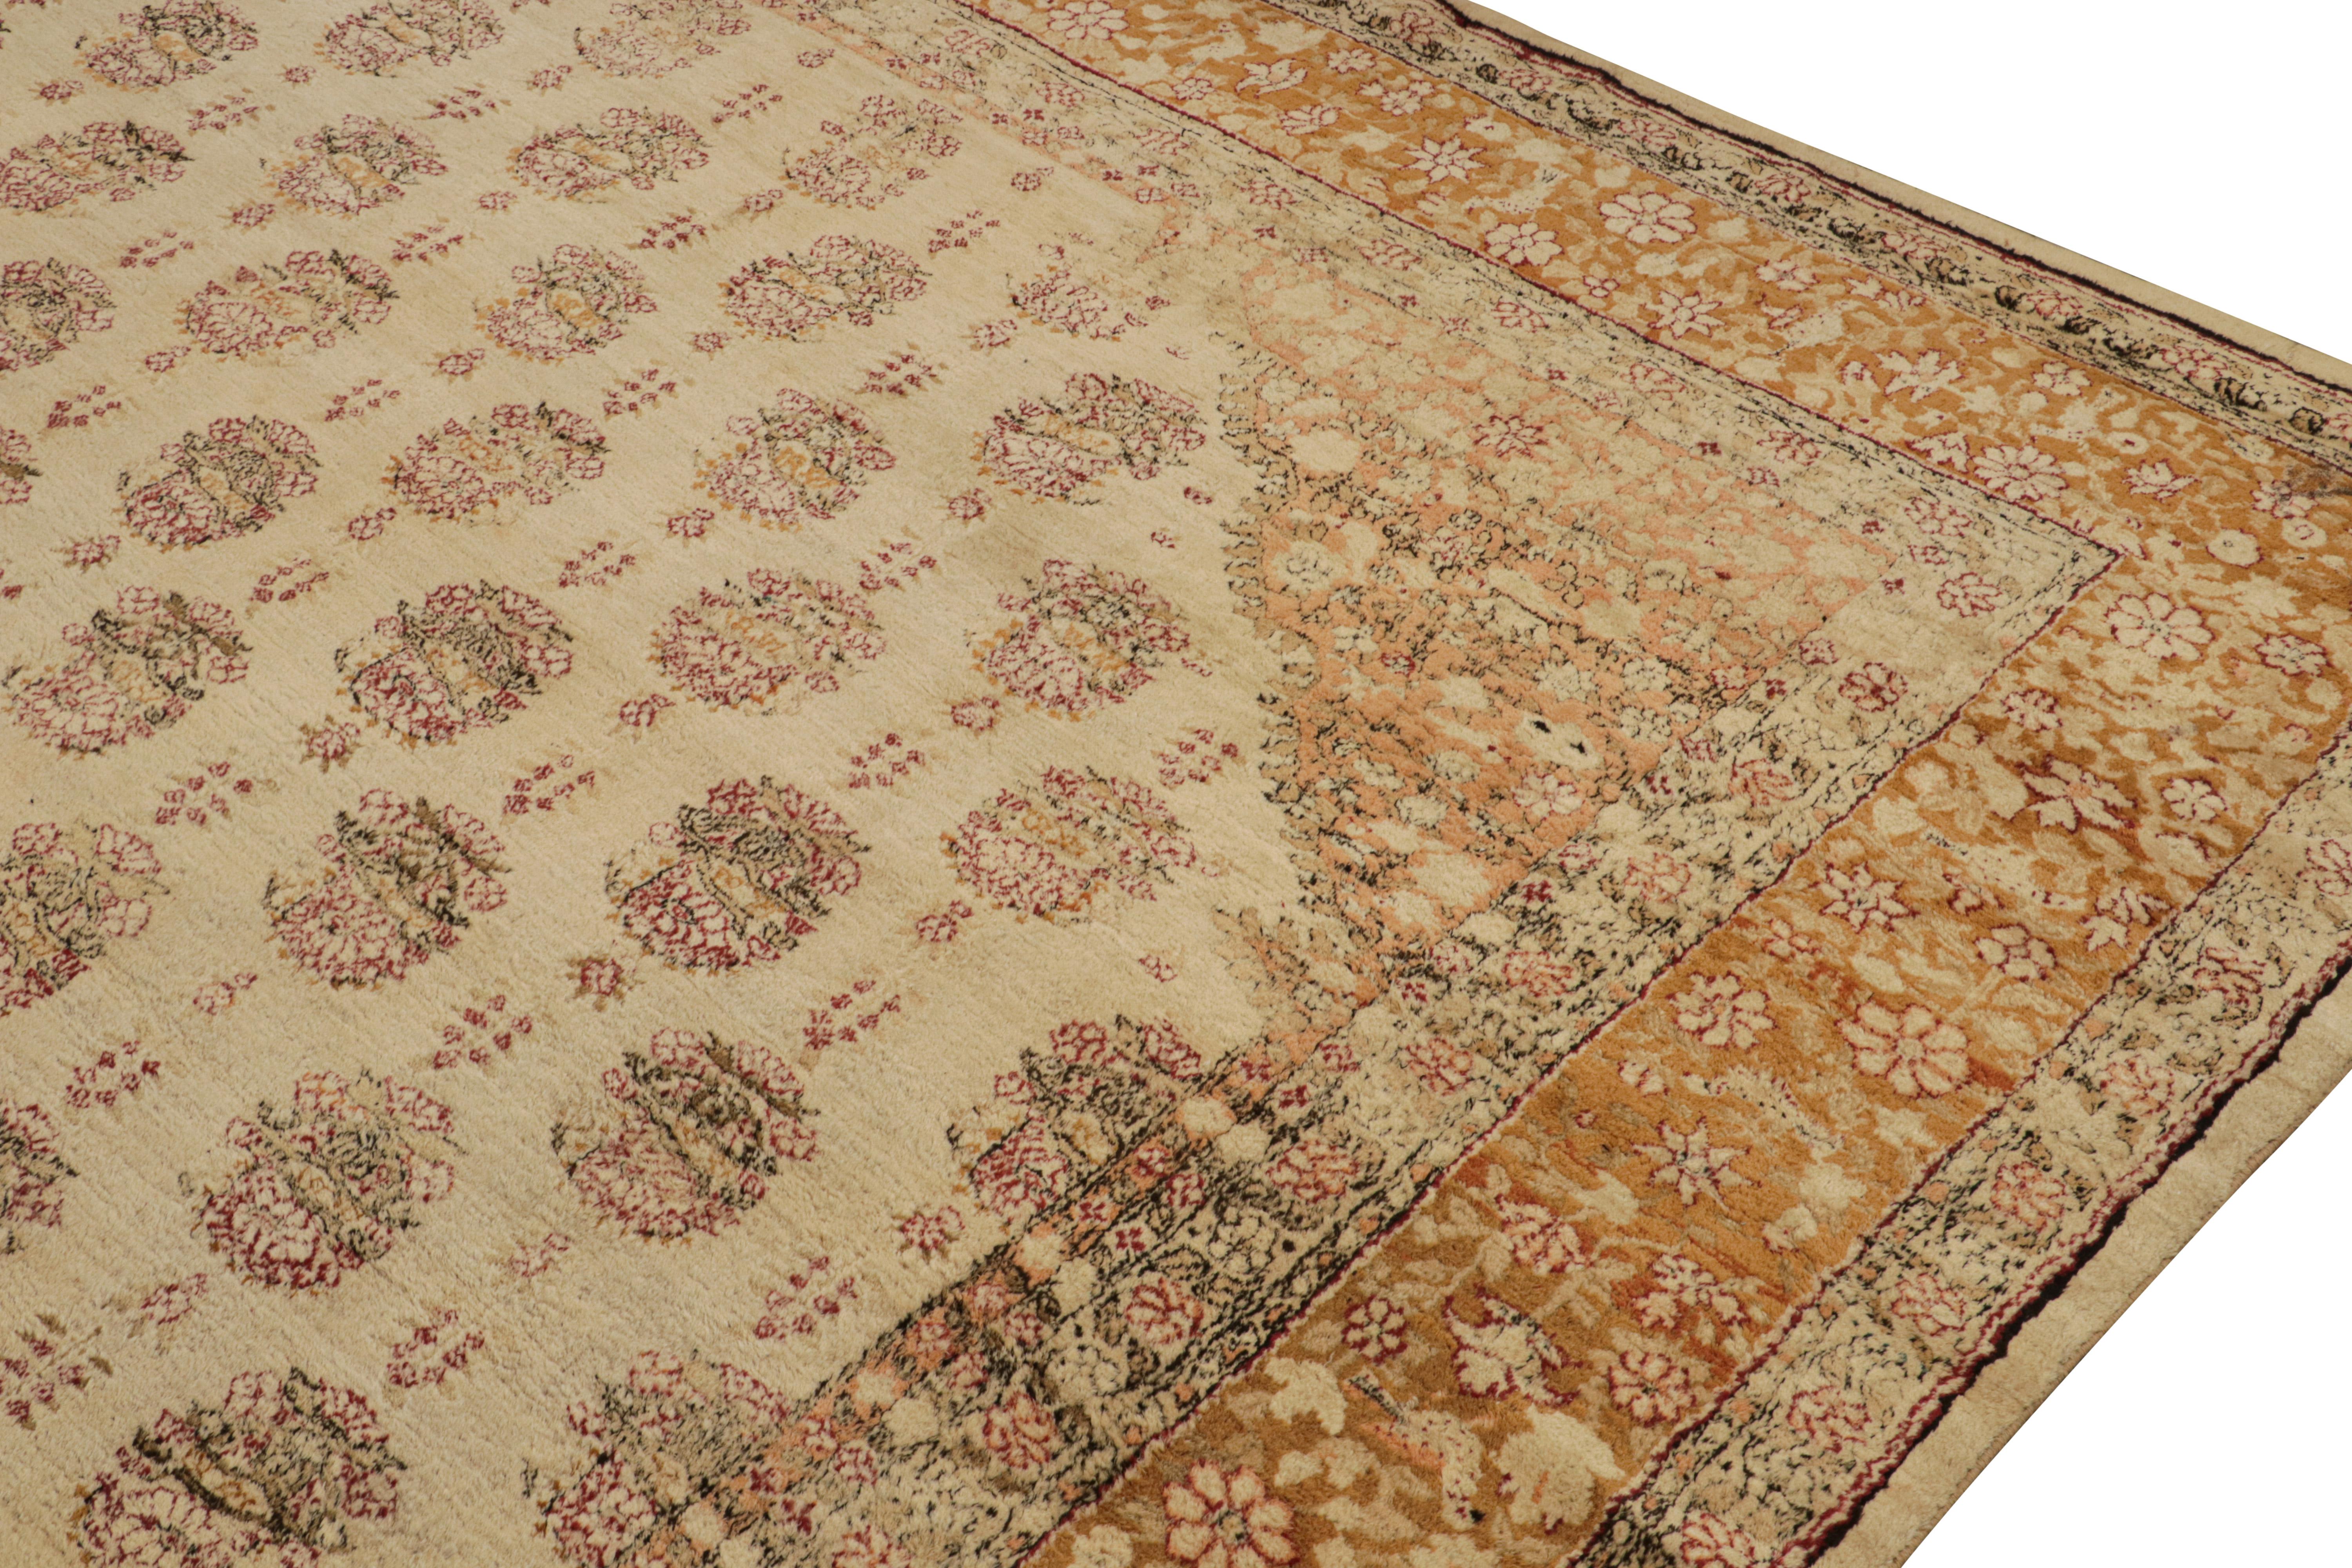 Oversized Antique Agra Rug in Gold with Floral patterns In Good Condition For Sale In Long Island City, NY